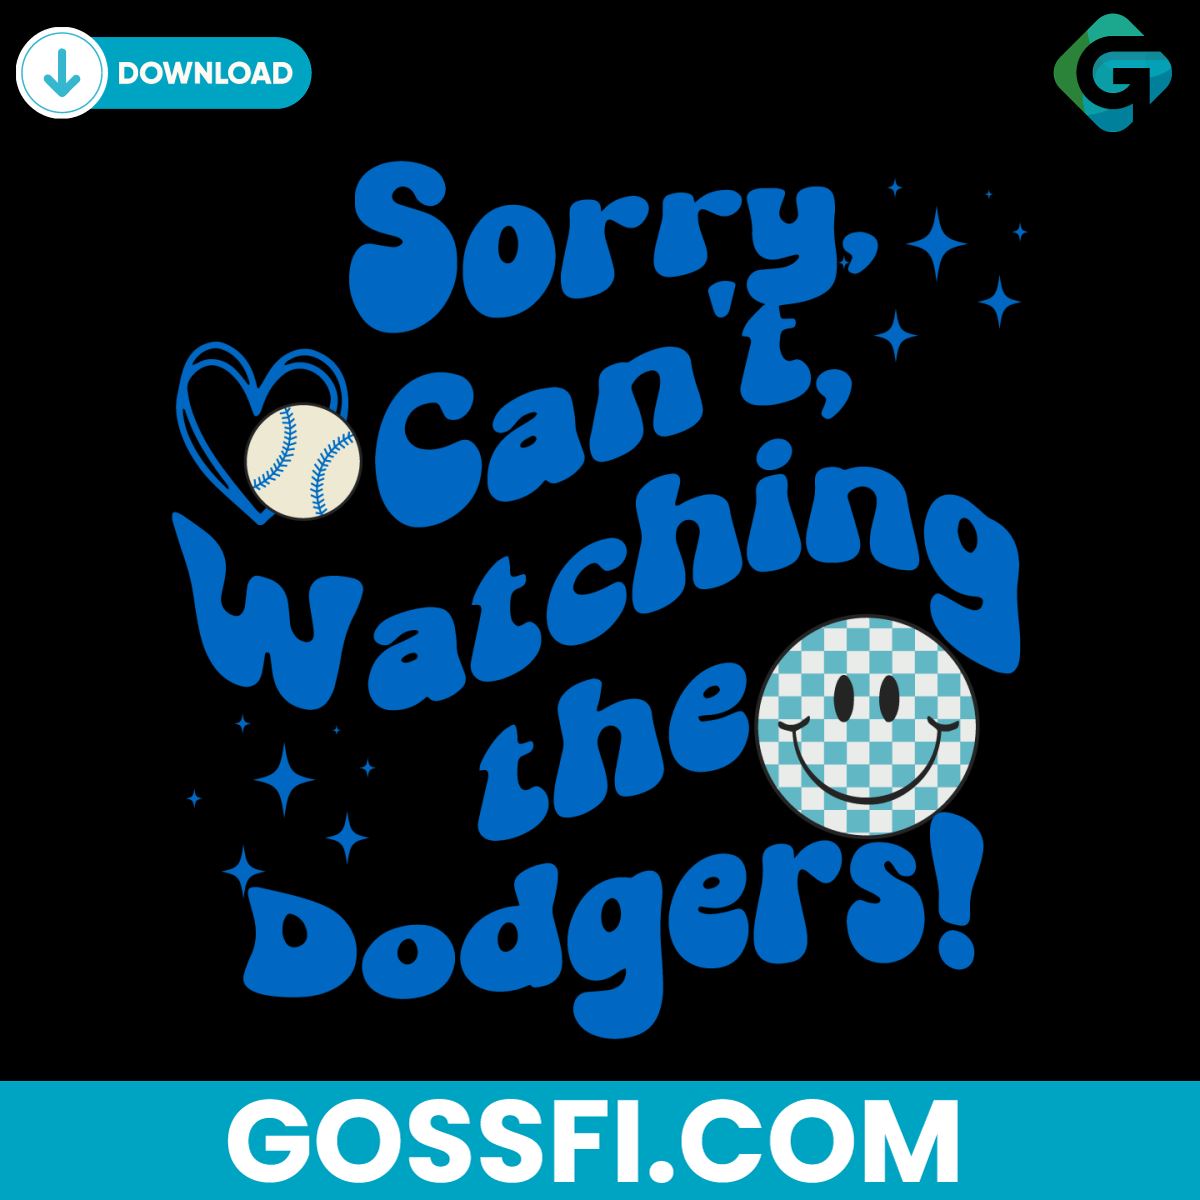 retro-sorry-cant-watching-the-dodgers-baseball-svg